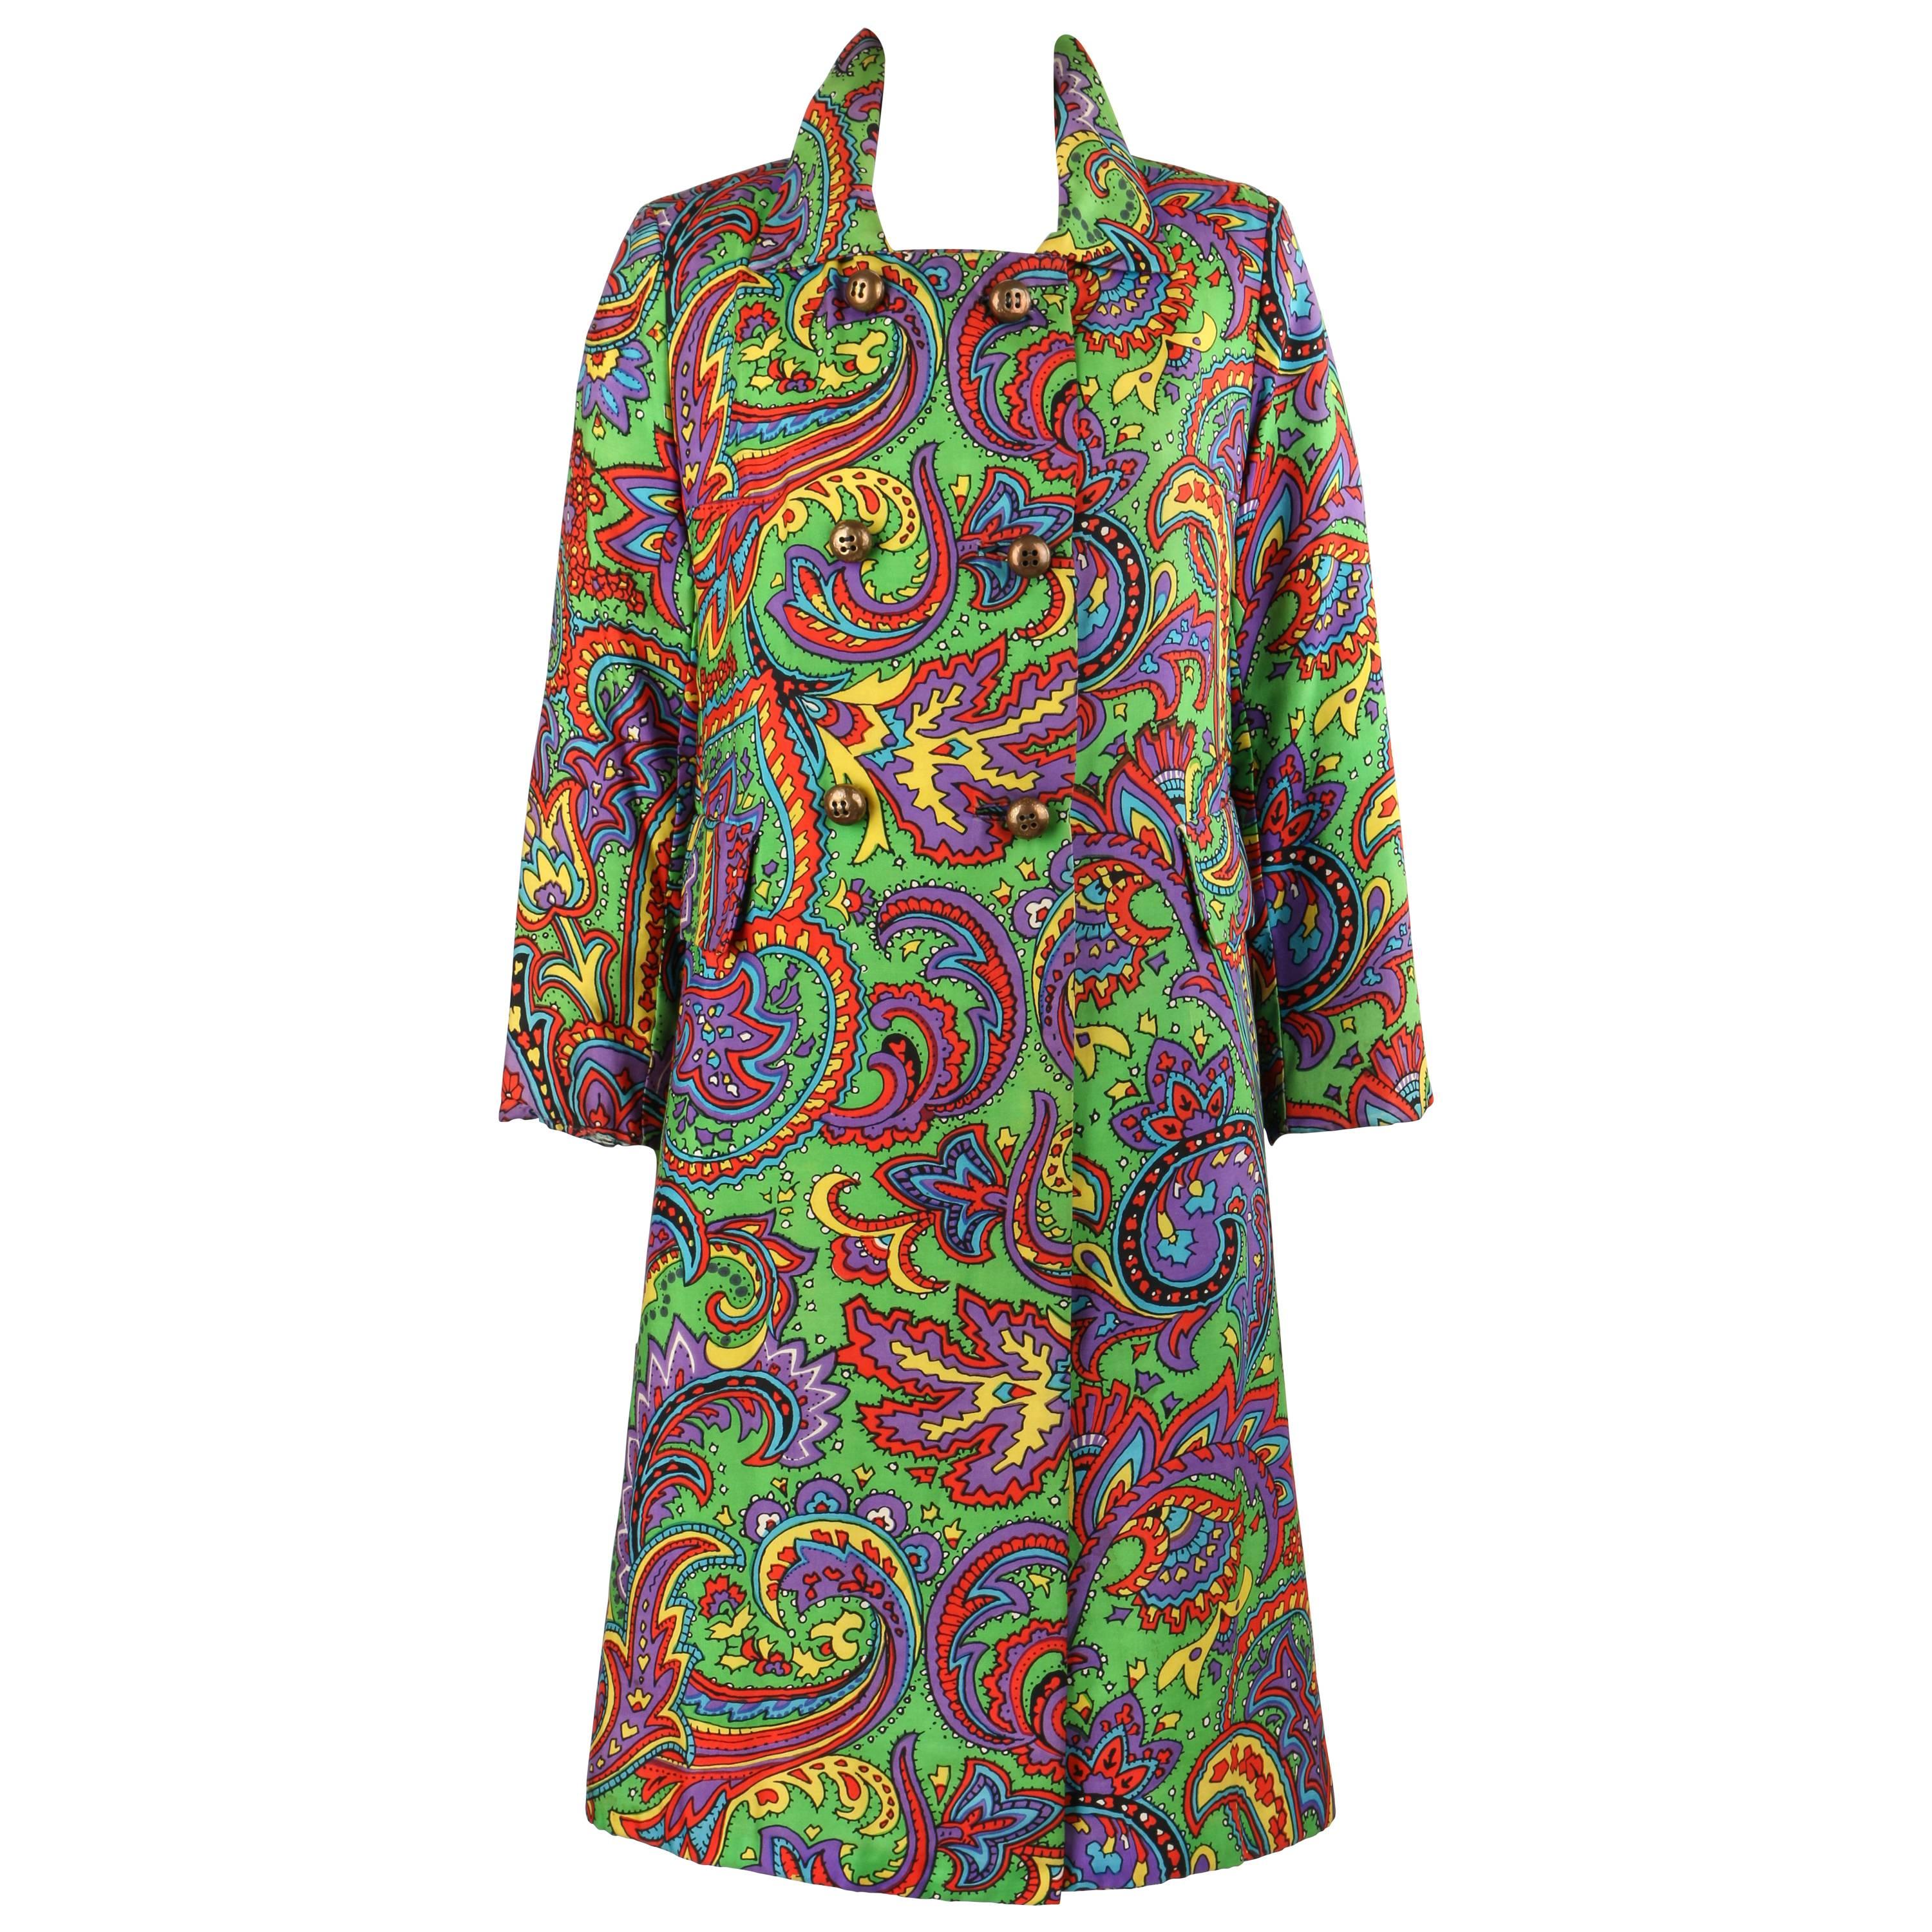 BILL BLASS For Bond Street c.1970s Multicolor Paisley Print Double Breasted Coat